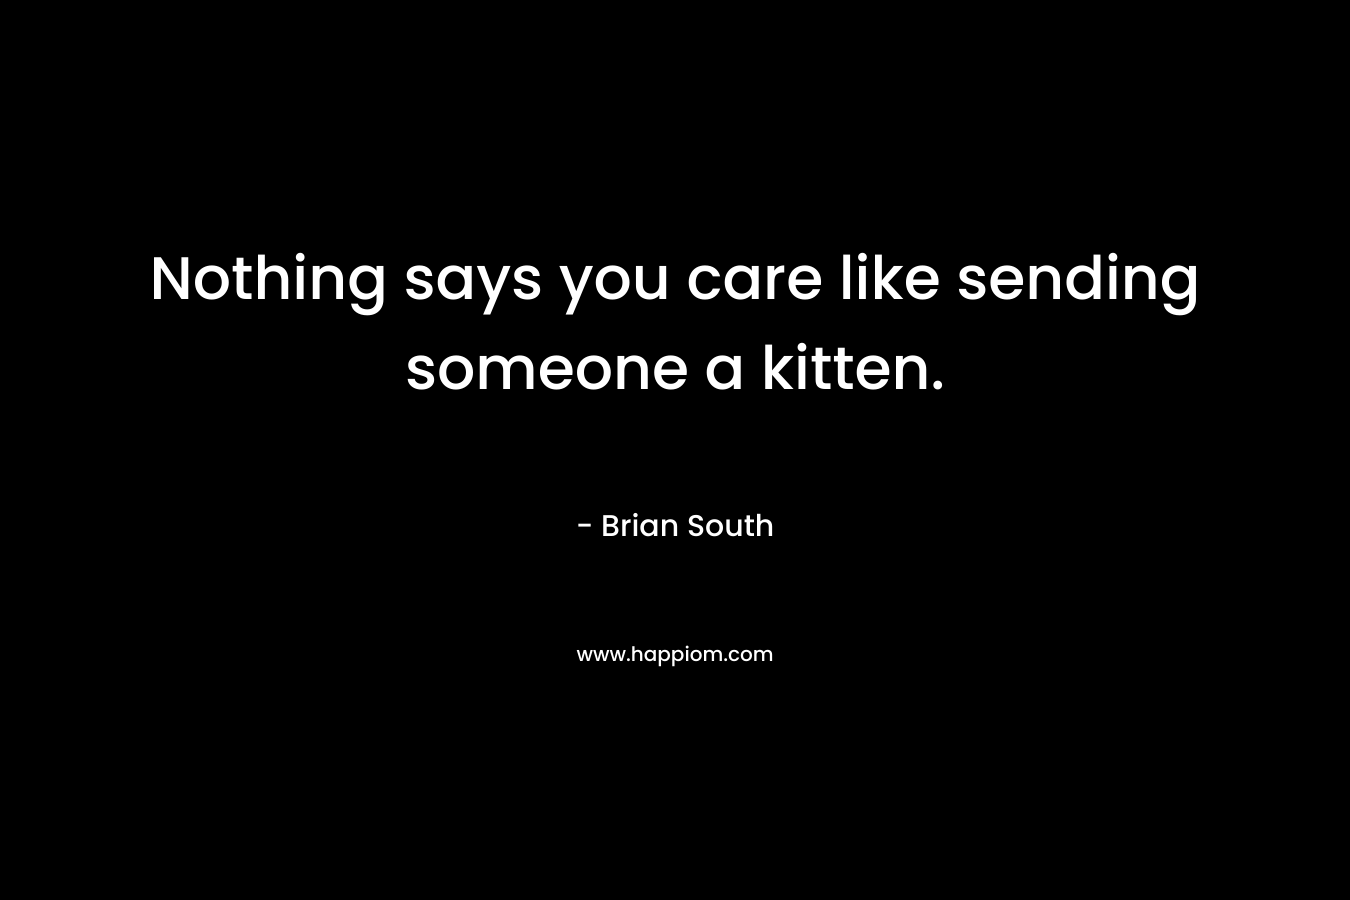 Nothing says you care like sending someone a kitten.